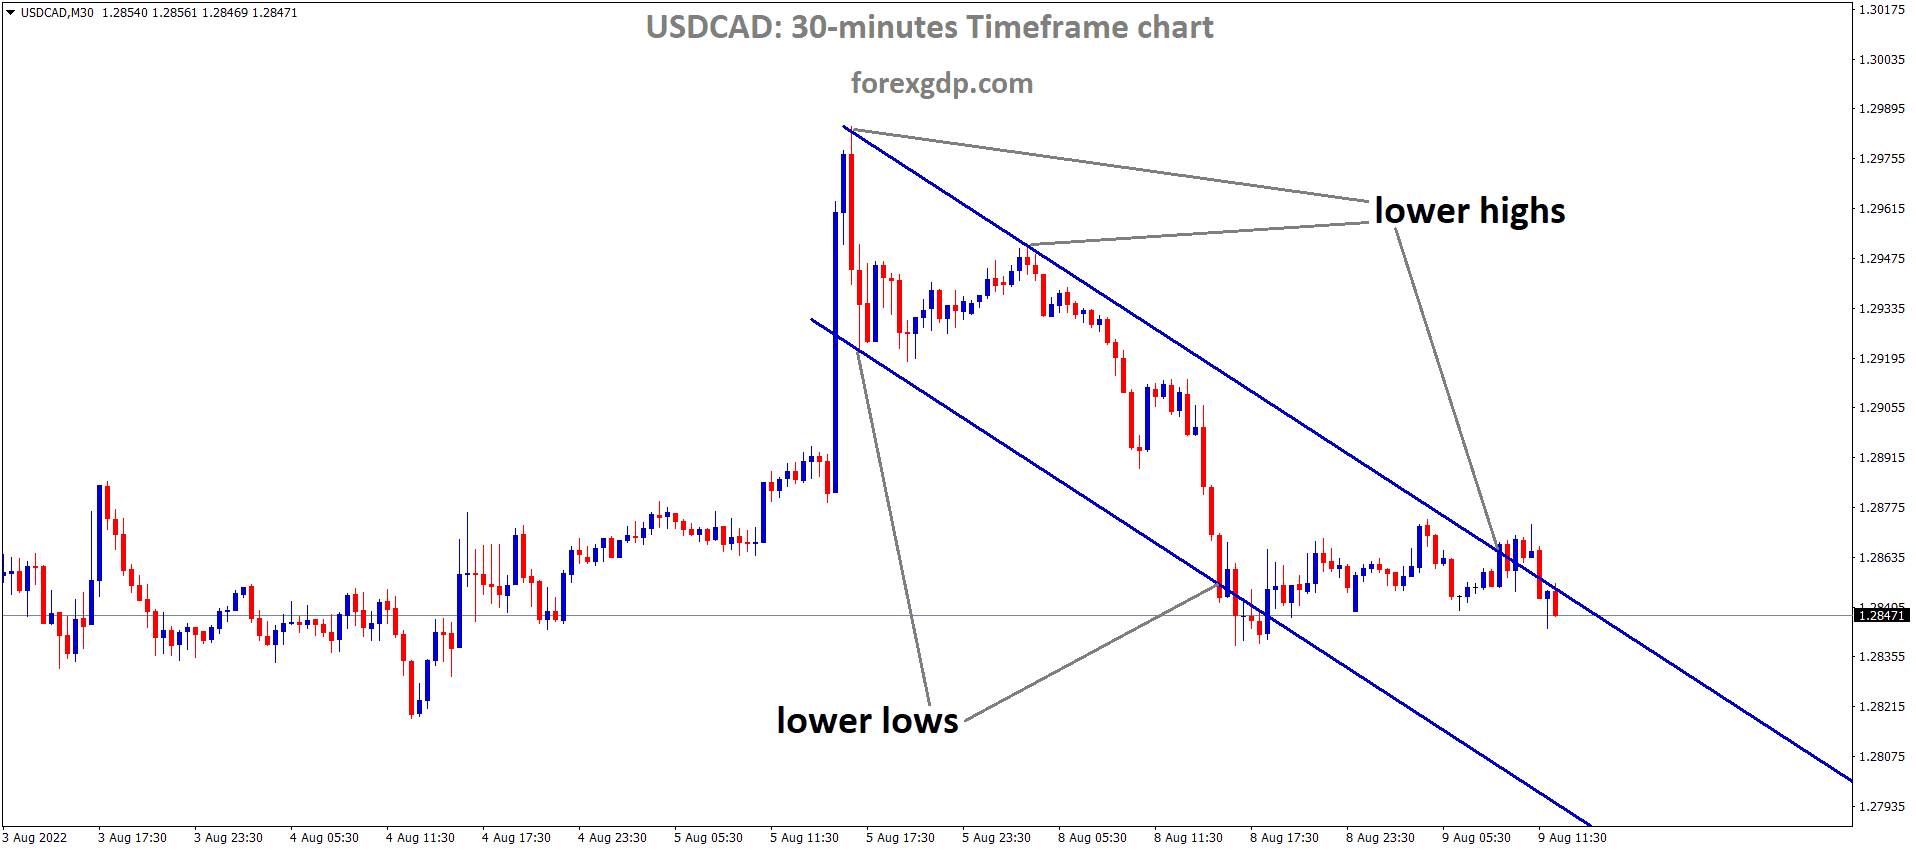 USDCAD is moving in the Descending channel and the Market has fallen from the Lower high area of the channel